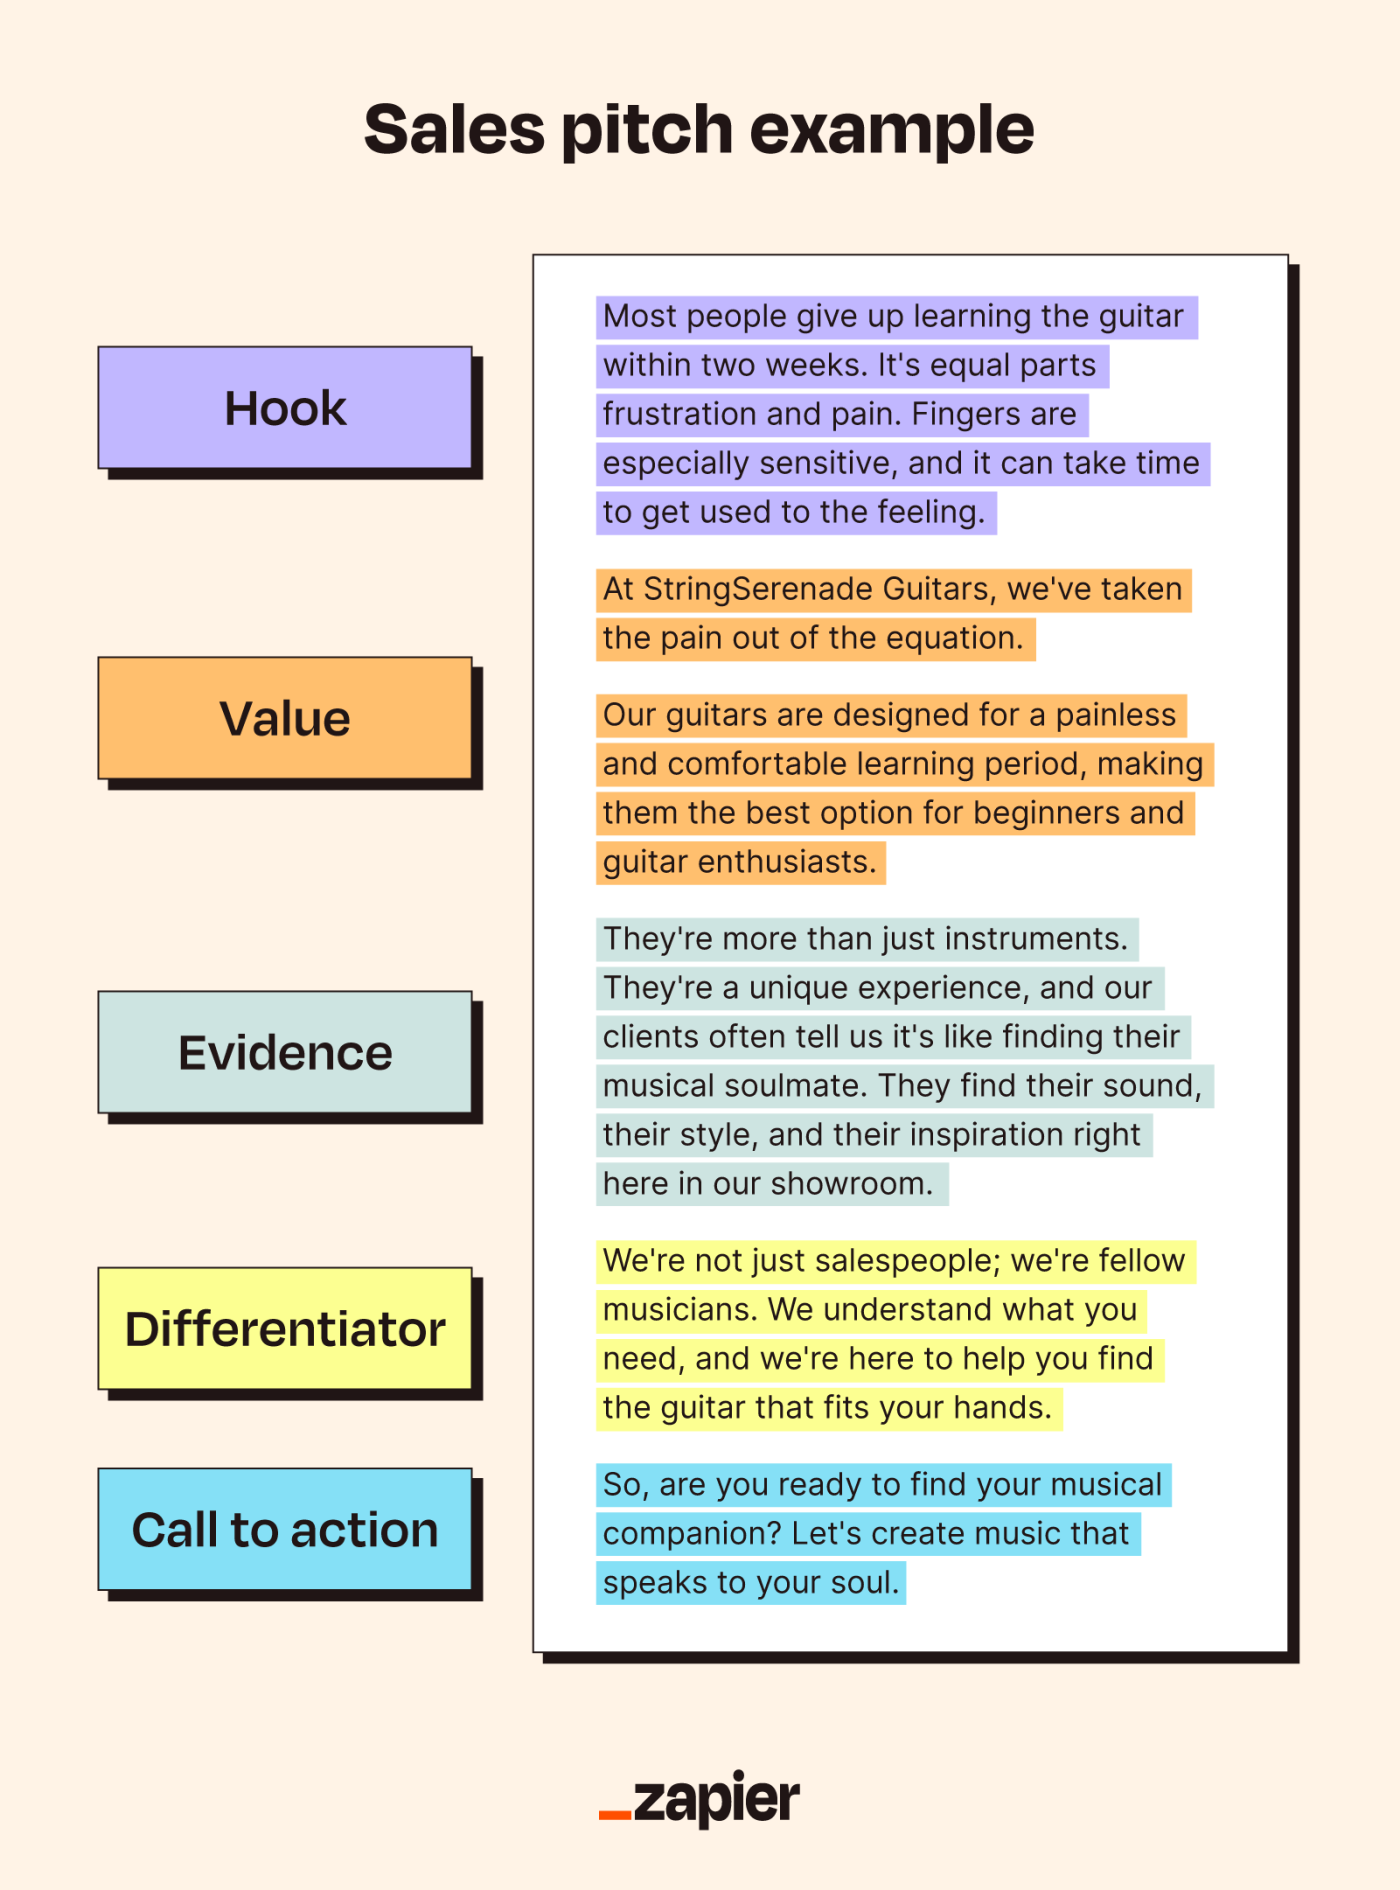 Example of an elevator sales pitch, with the hook, value, evidence, differentiator, and call to action highlighted in different colors